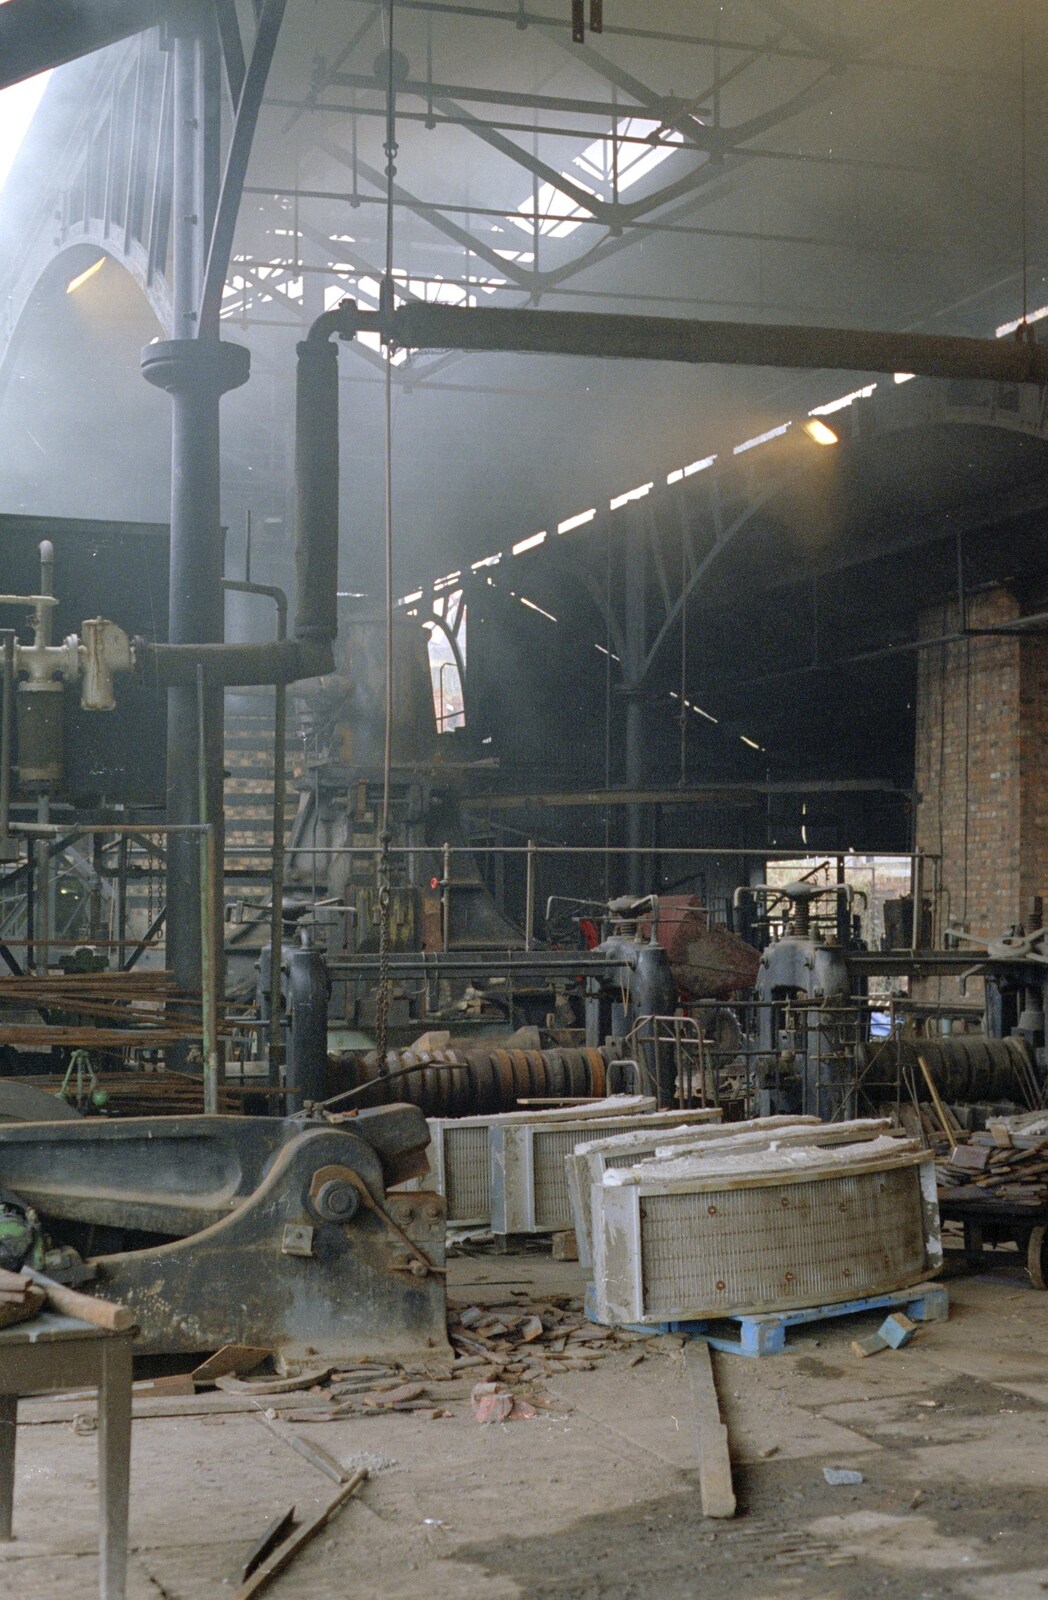 Making cast iron from Capel Curig to Abergavenny: A Road-Trip With Hamish, Wales - 3rd April 1992